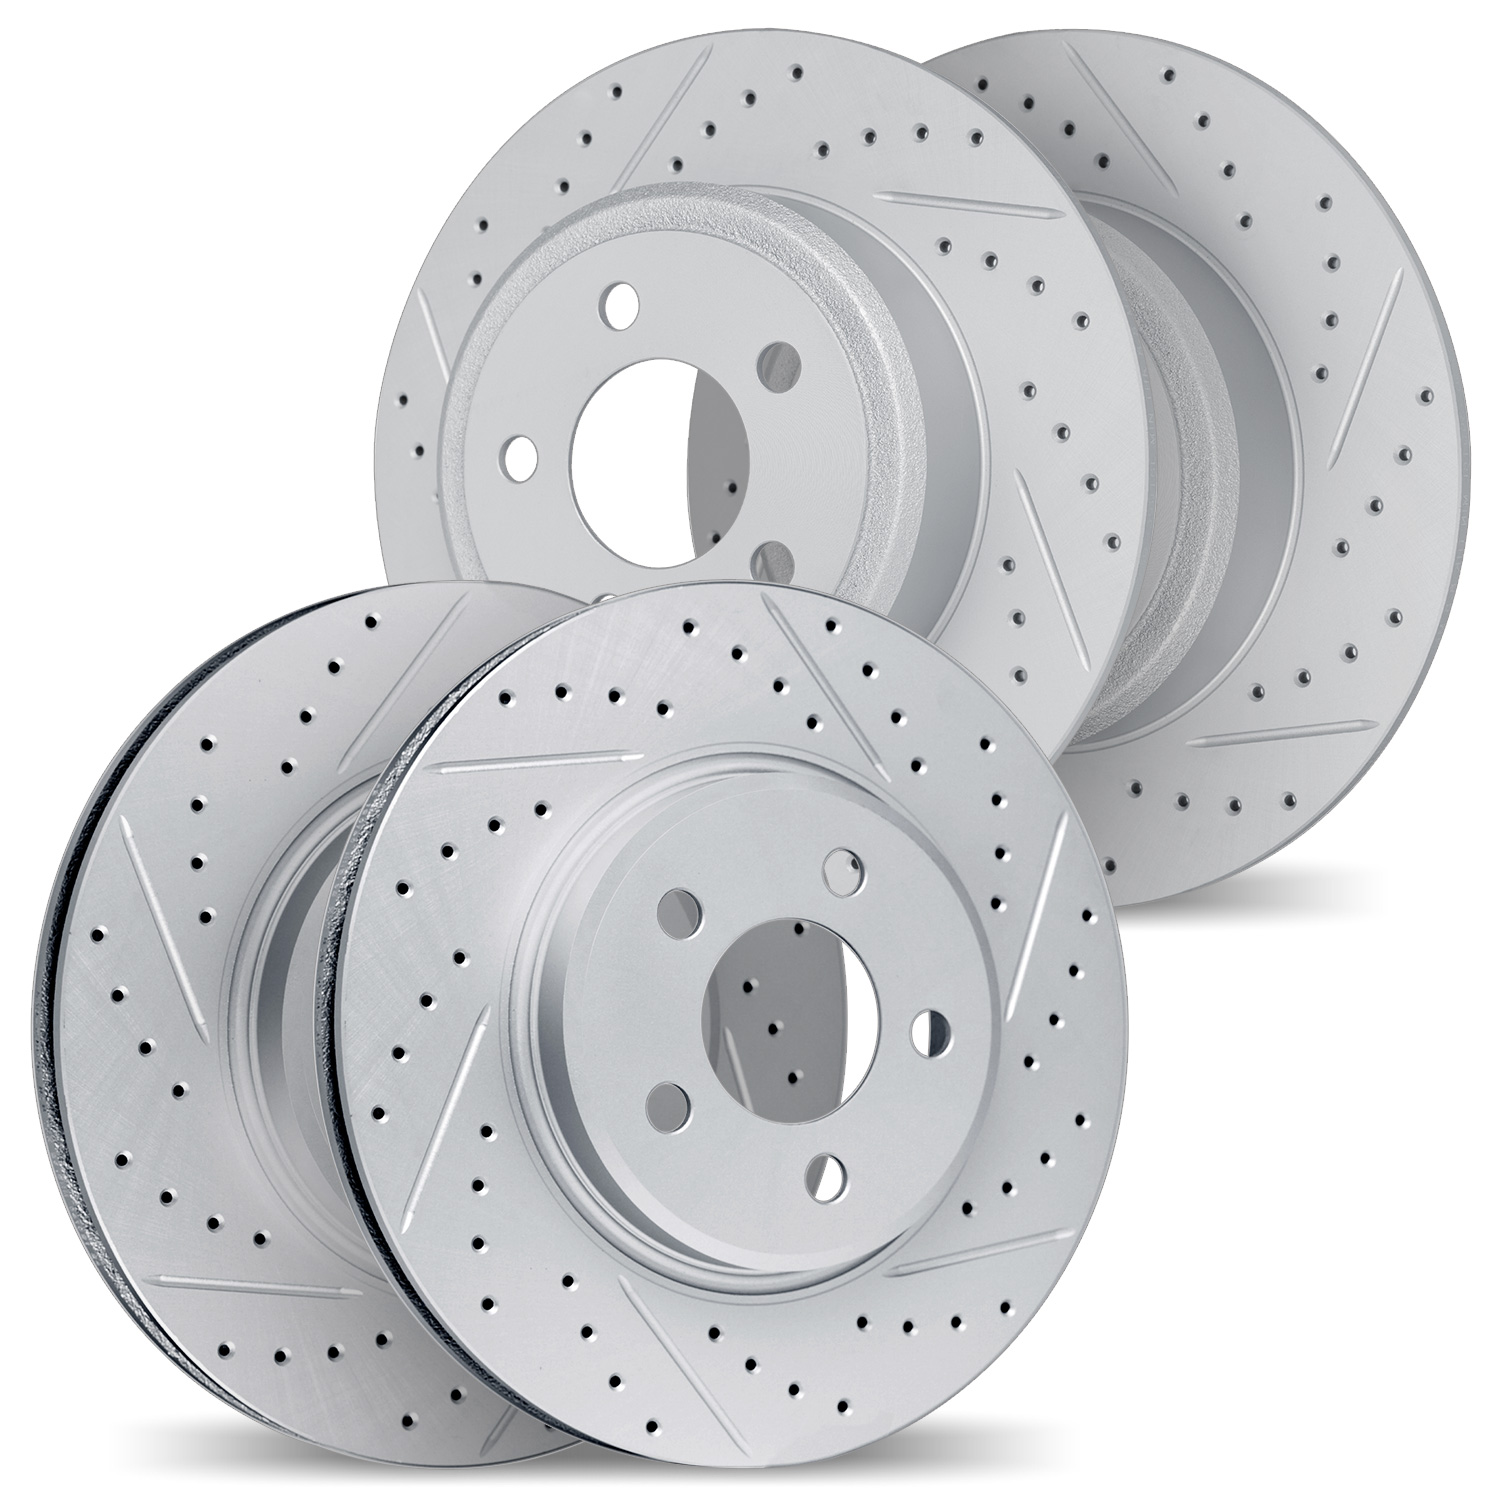 2004-74019 Geoperformance Drilled/Slotted Brake Rotors, 2005-2010 Audi/Volkswagen, Position: Front and Rear